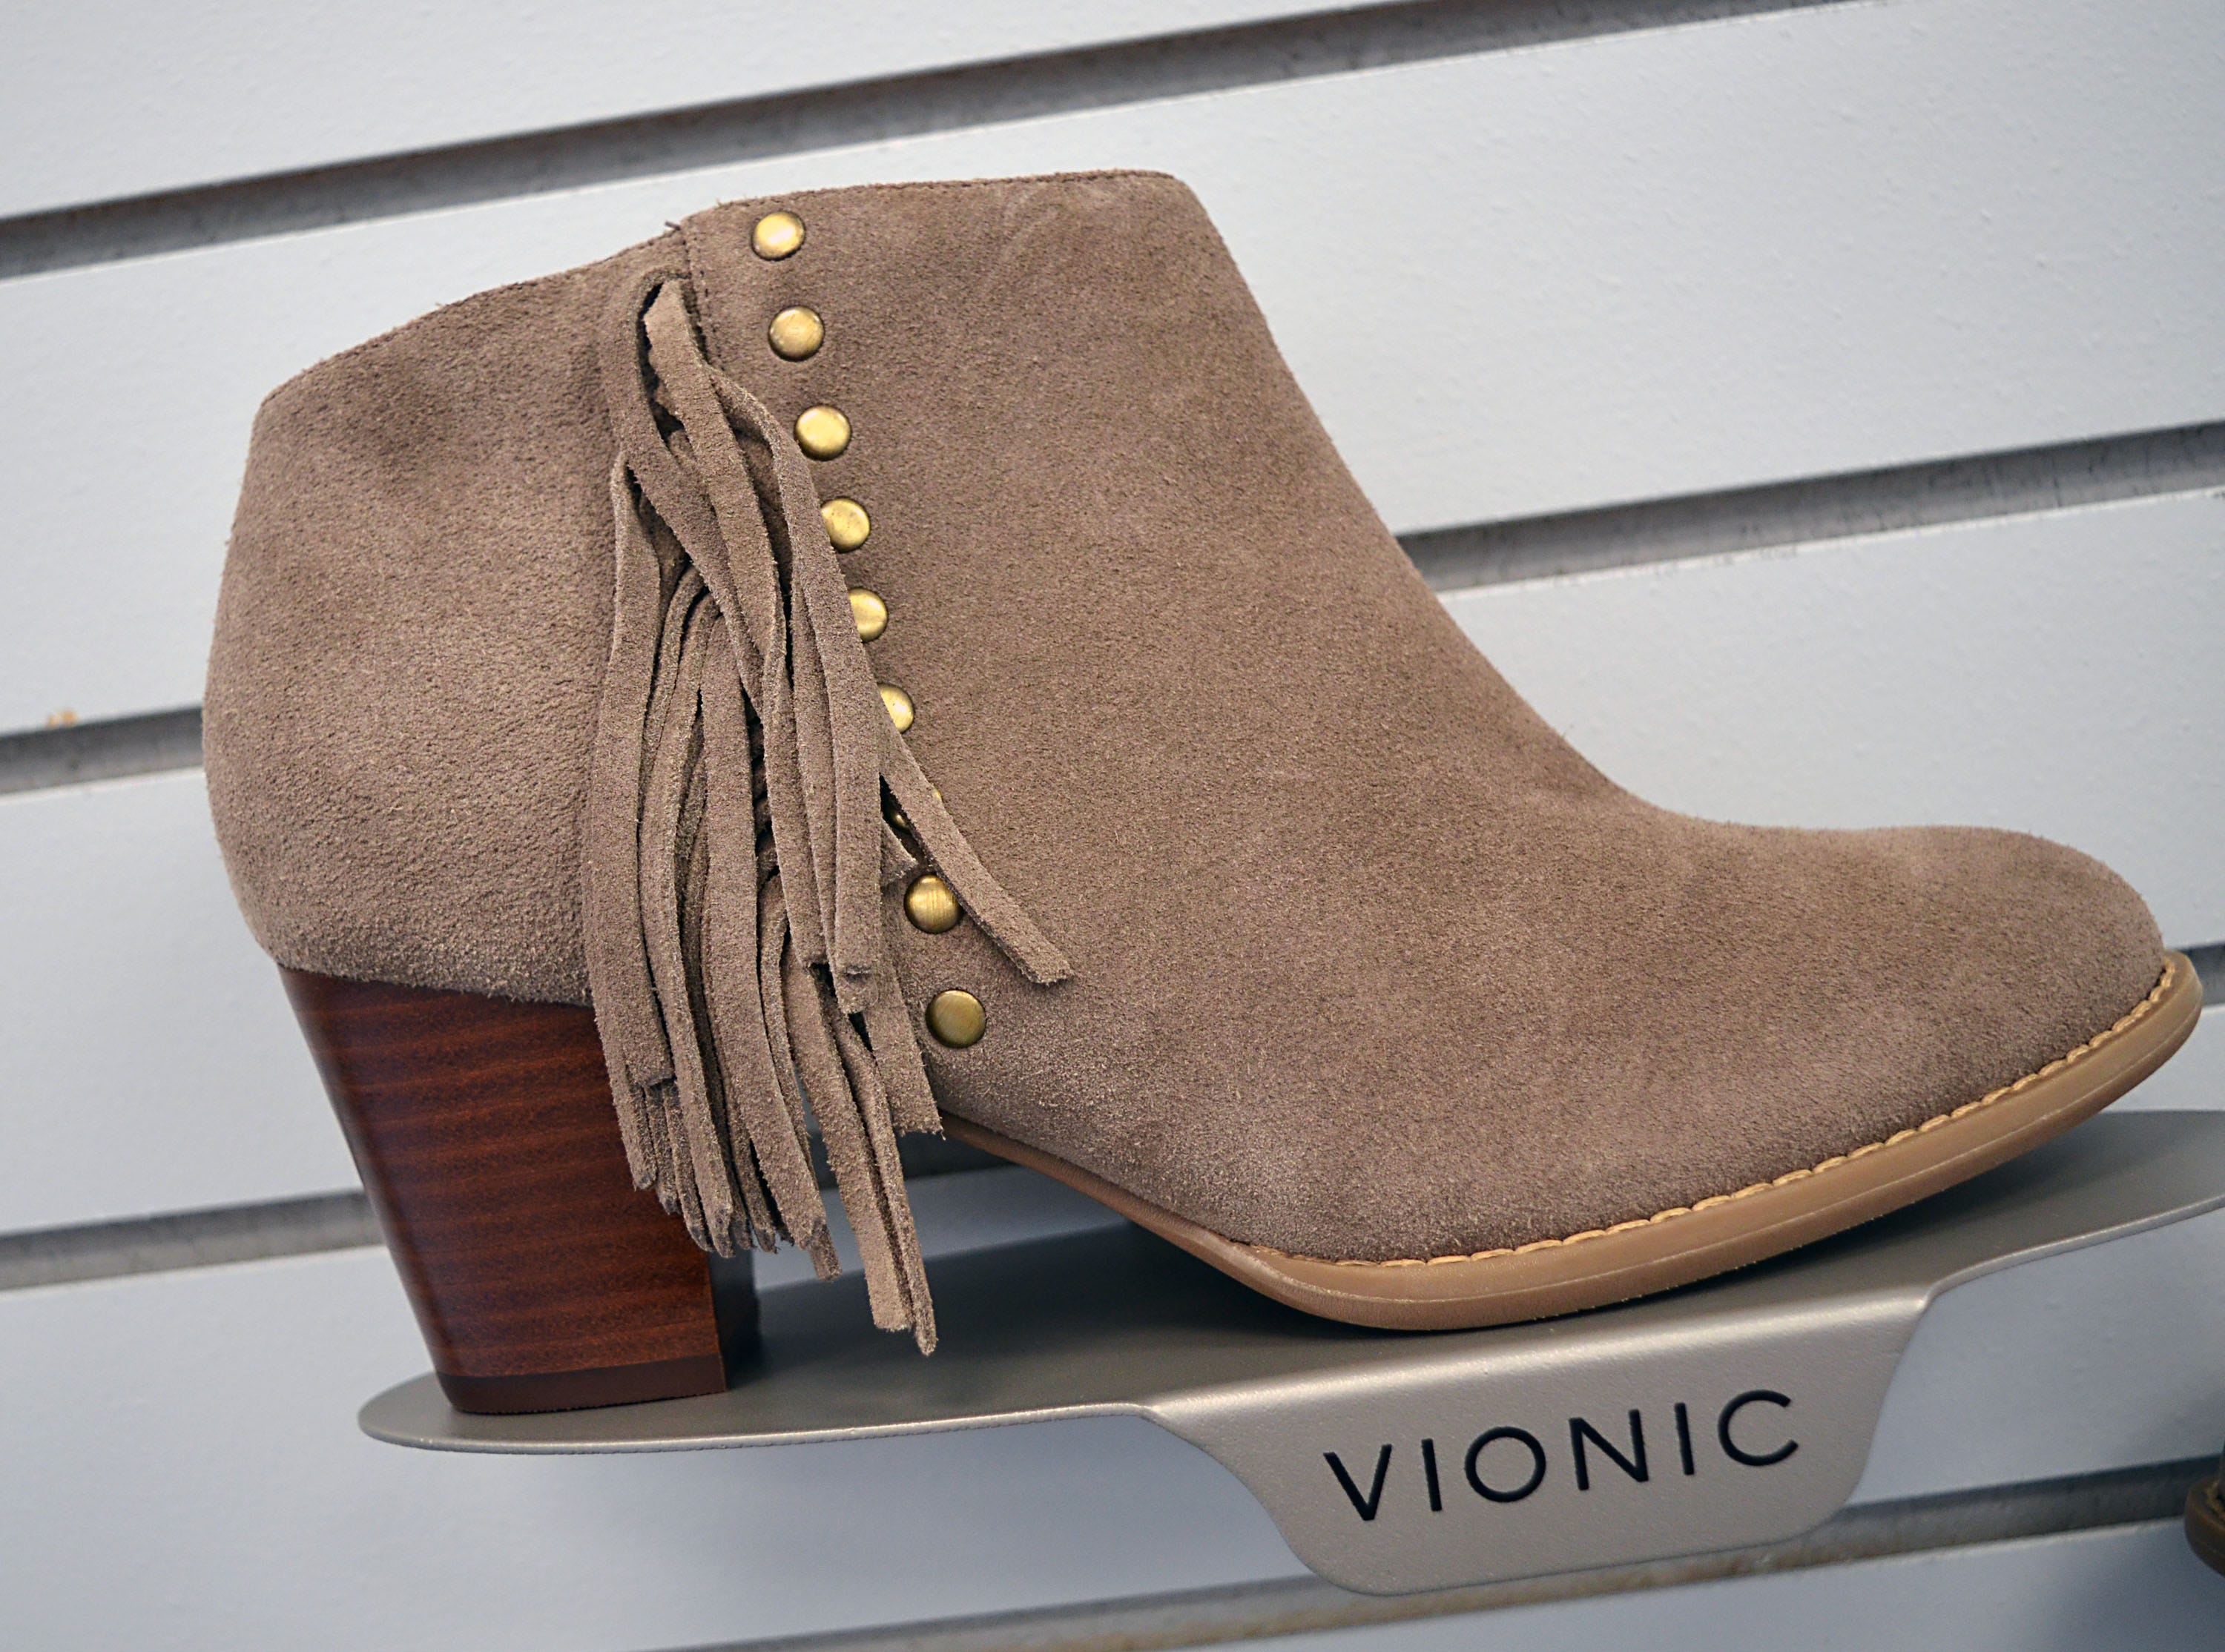 stores that sell vionic shoes